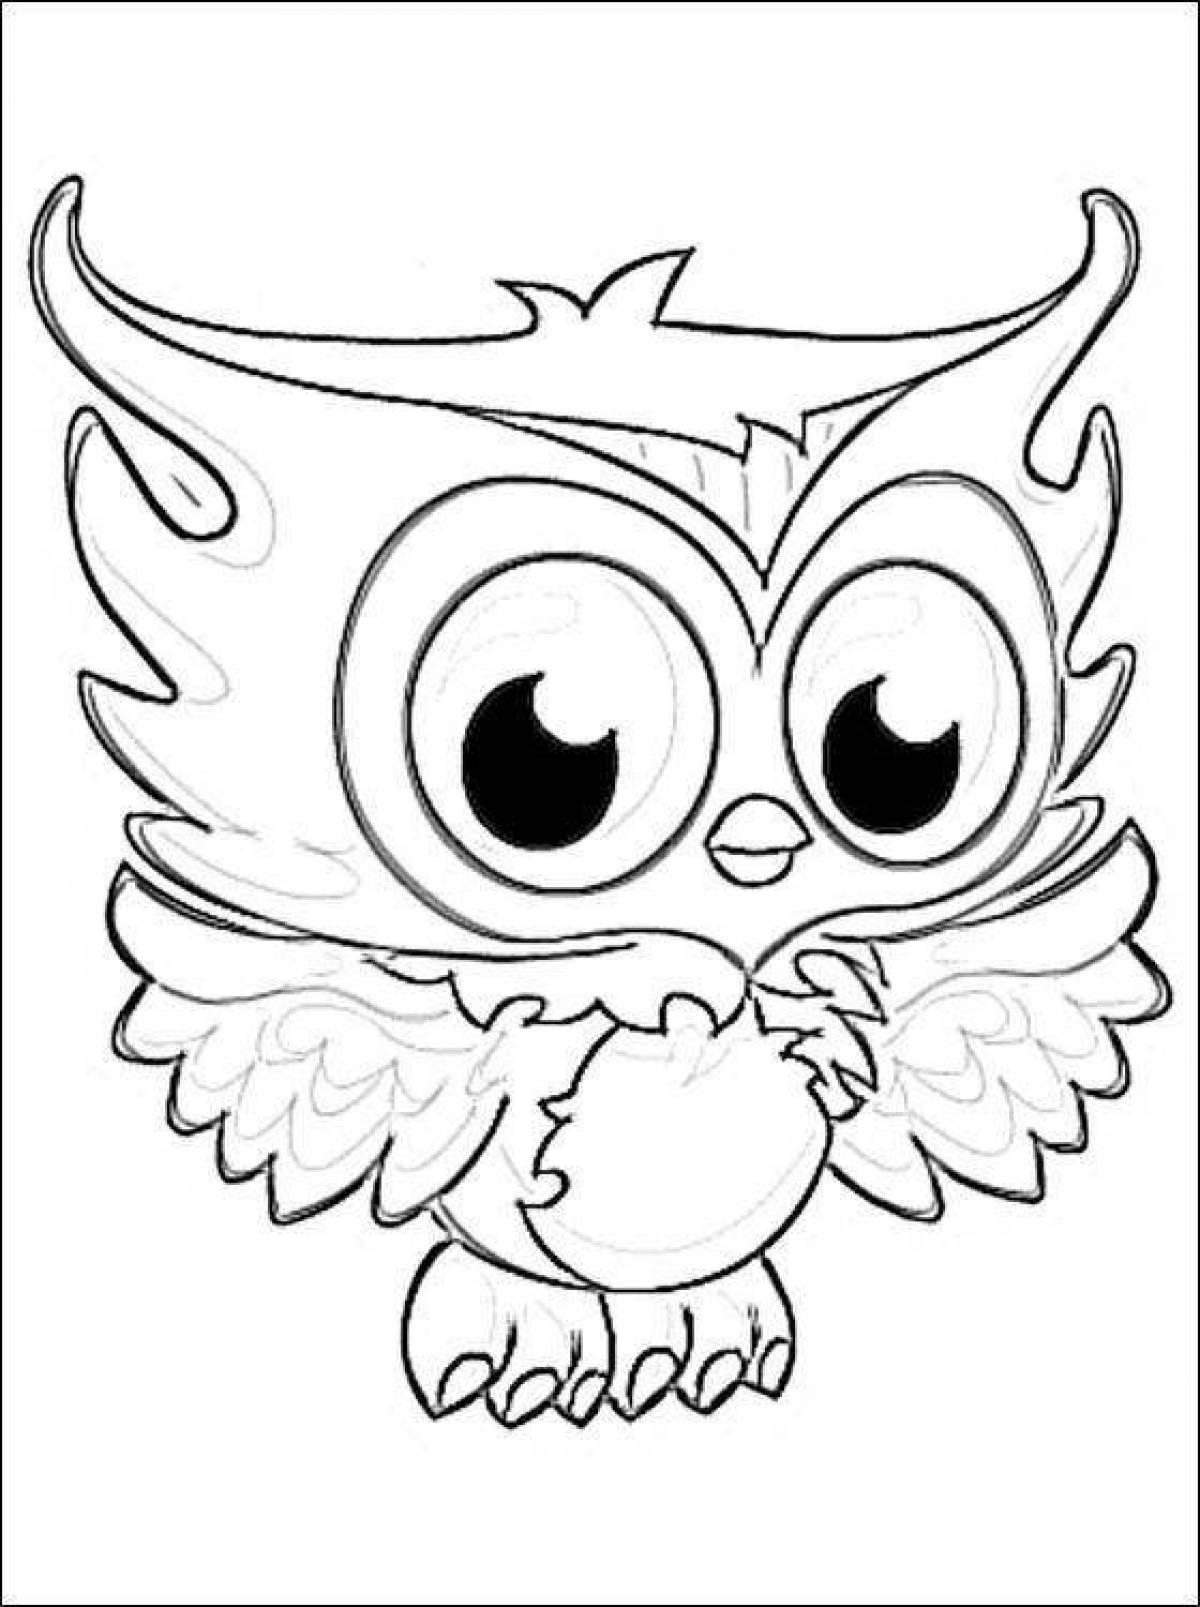 Adorable owlet coloring page